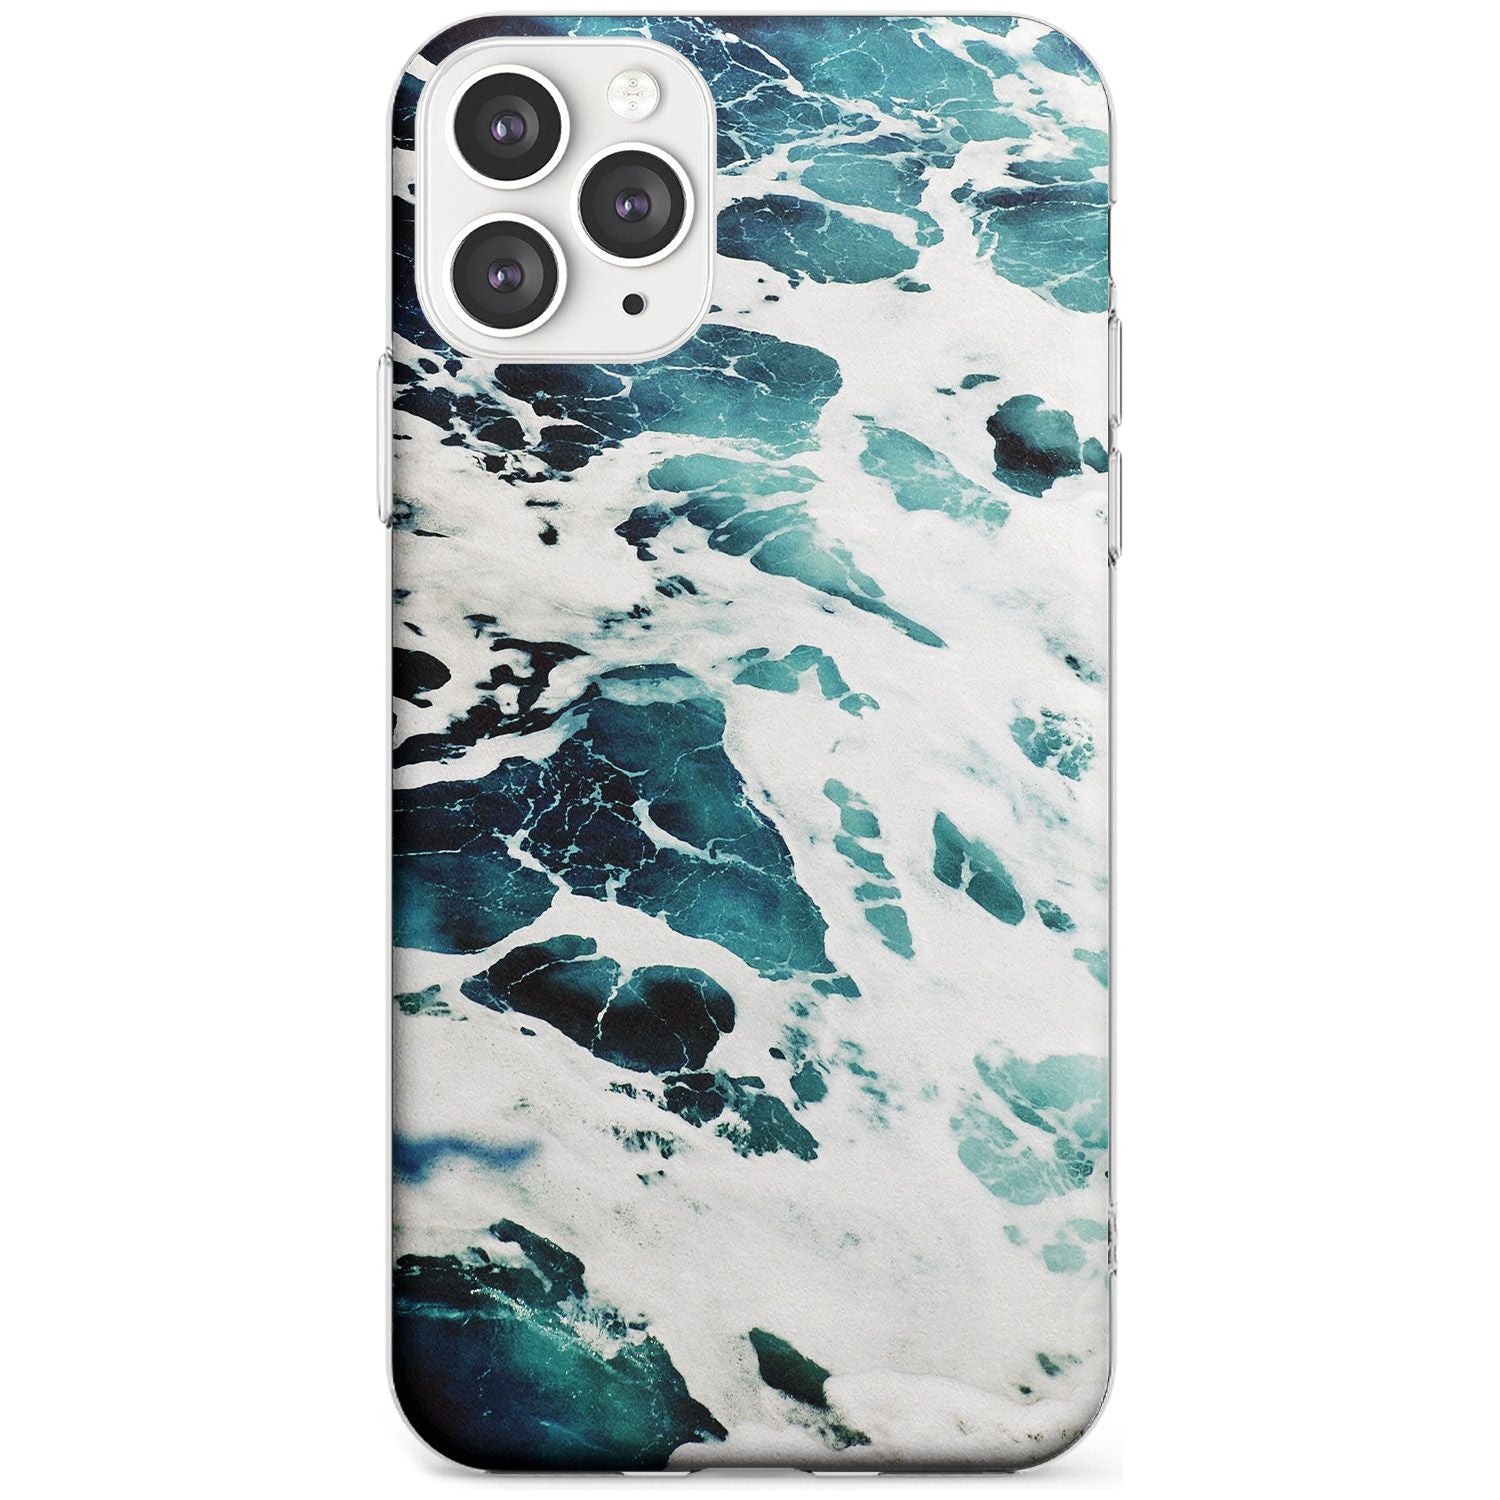 Ocean Waves Photograph Slim TPU Phone Case for iPhone 11 Pro Max